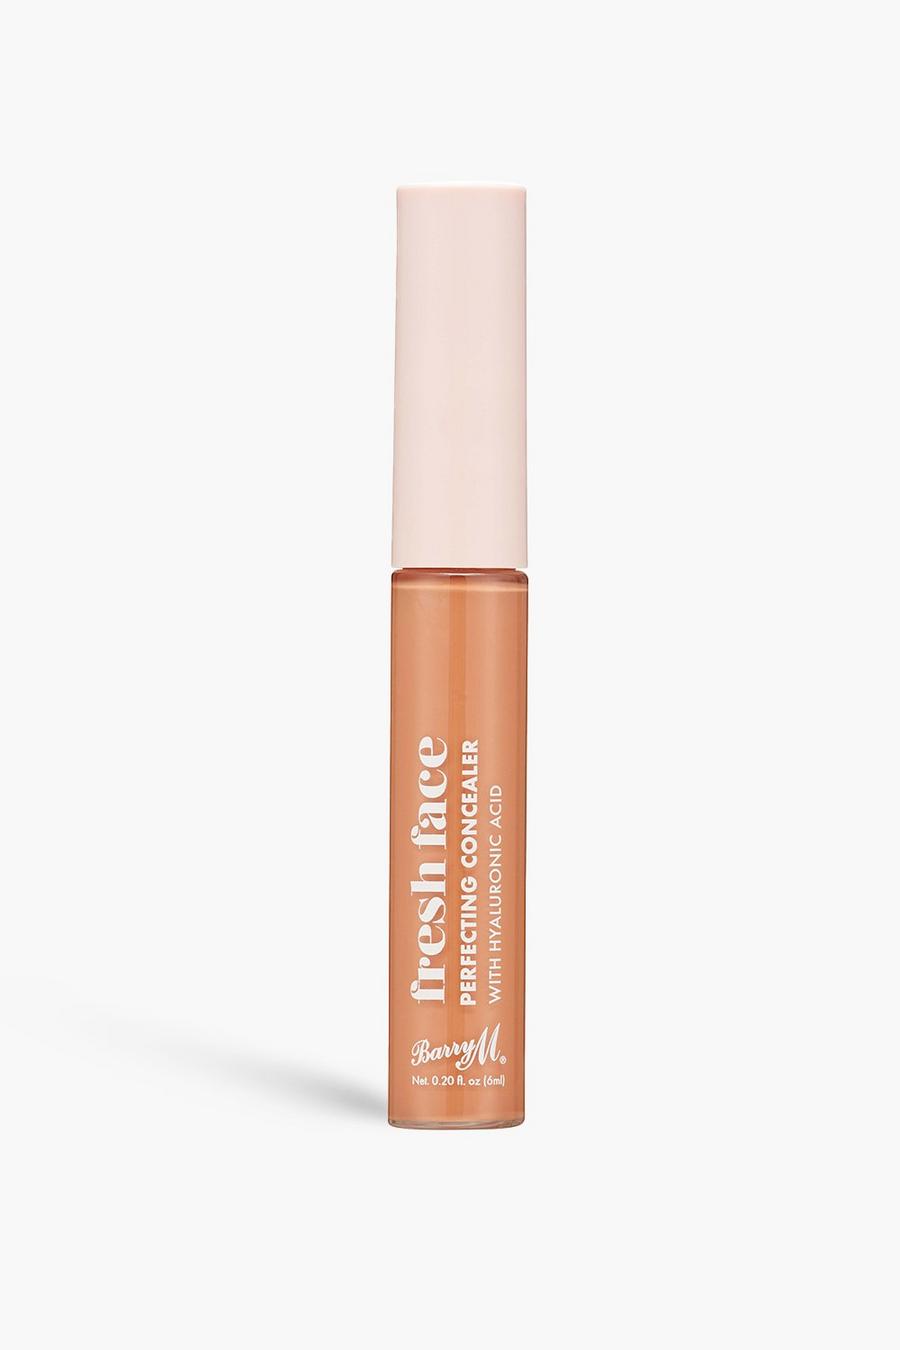 Tan brun Barry M Fresh Face Perfecting Concealer 8